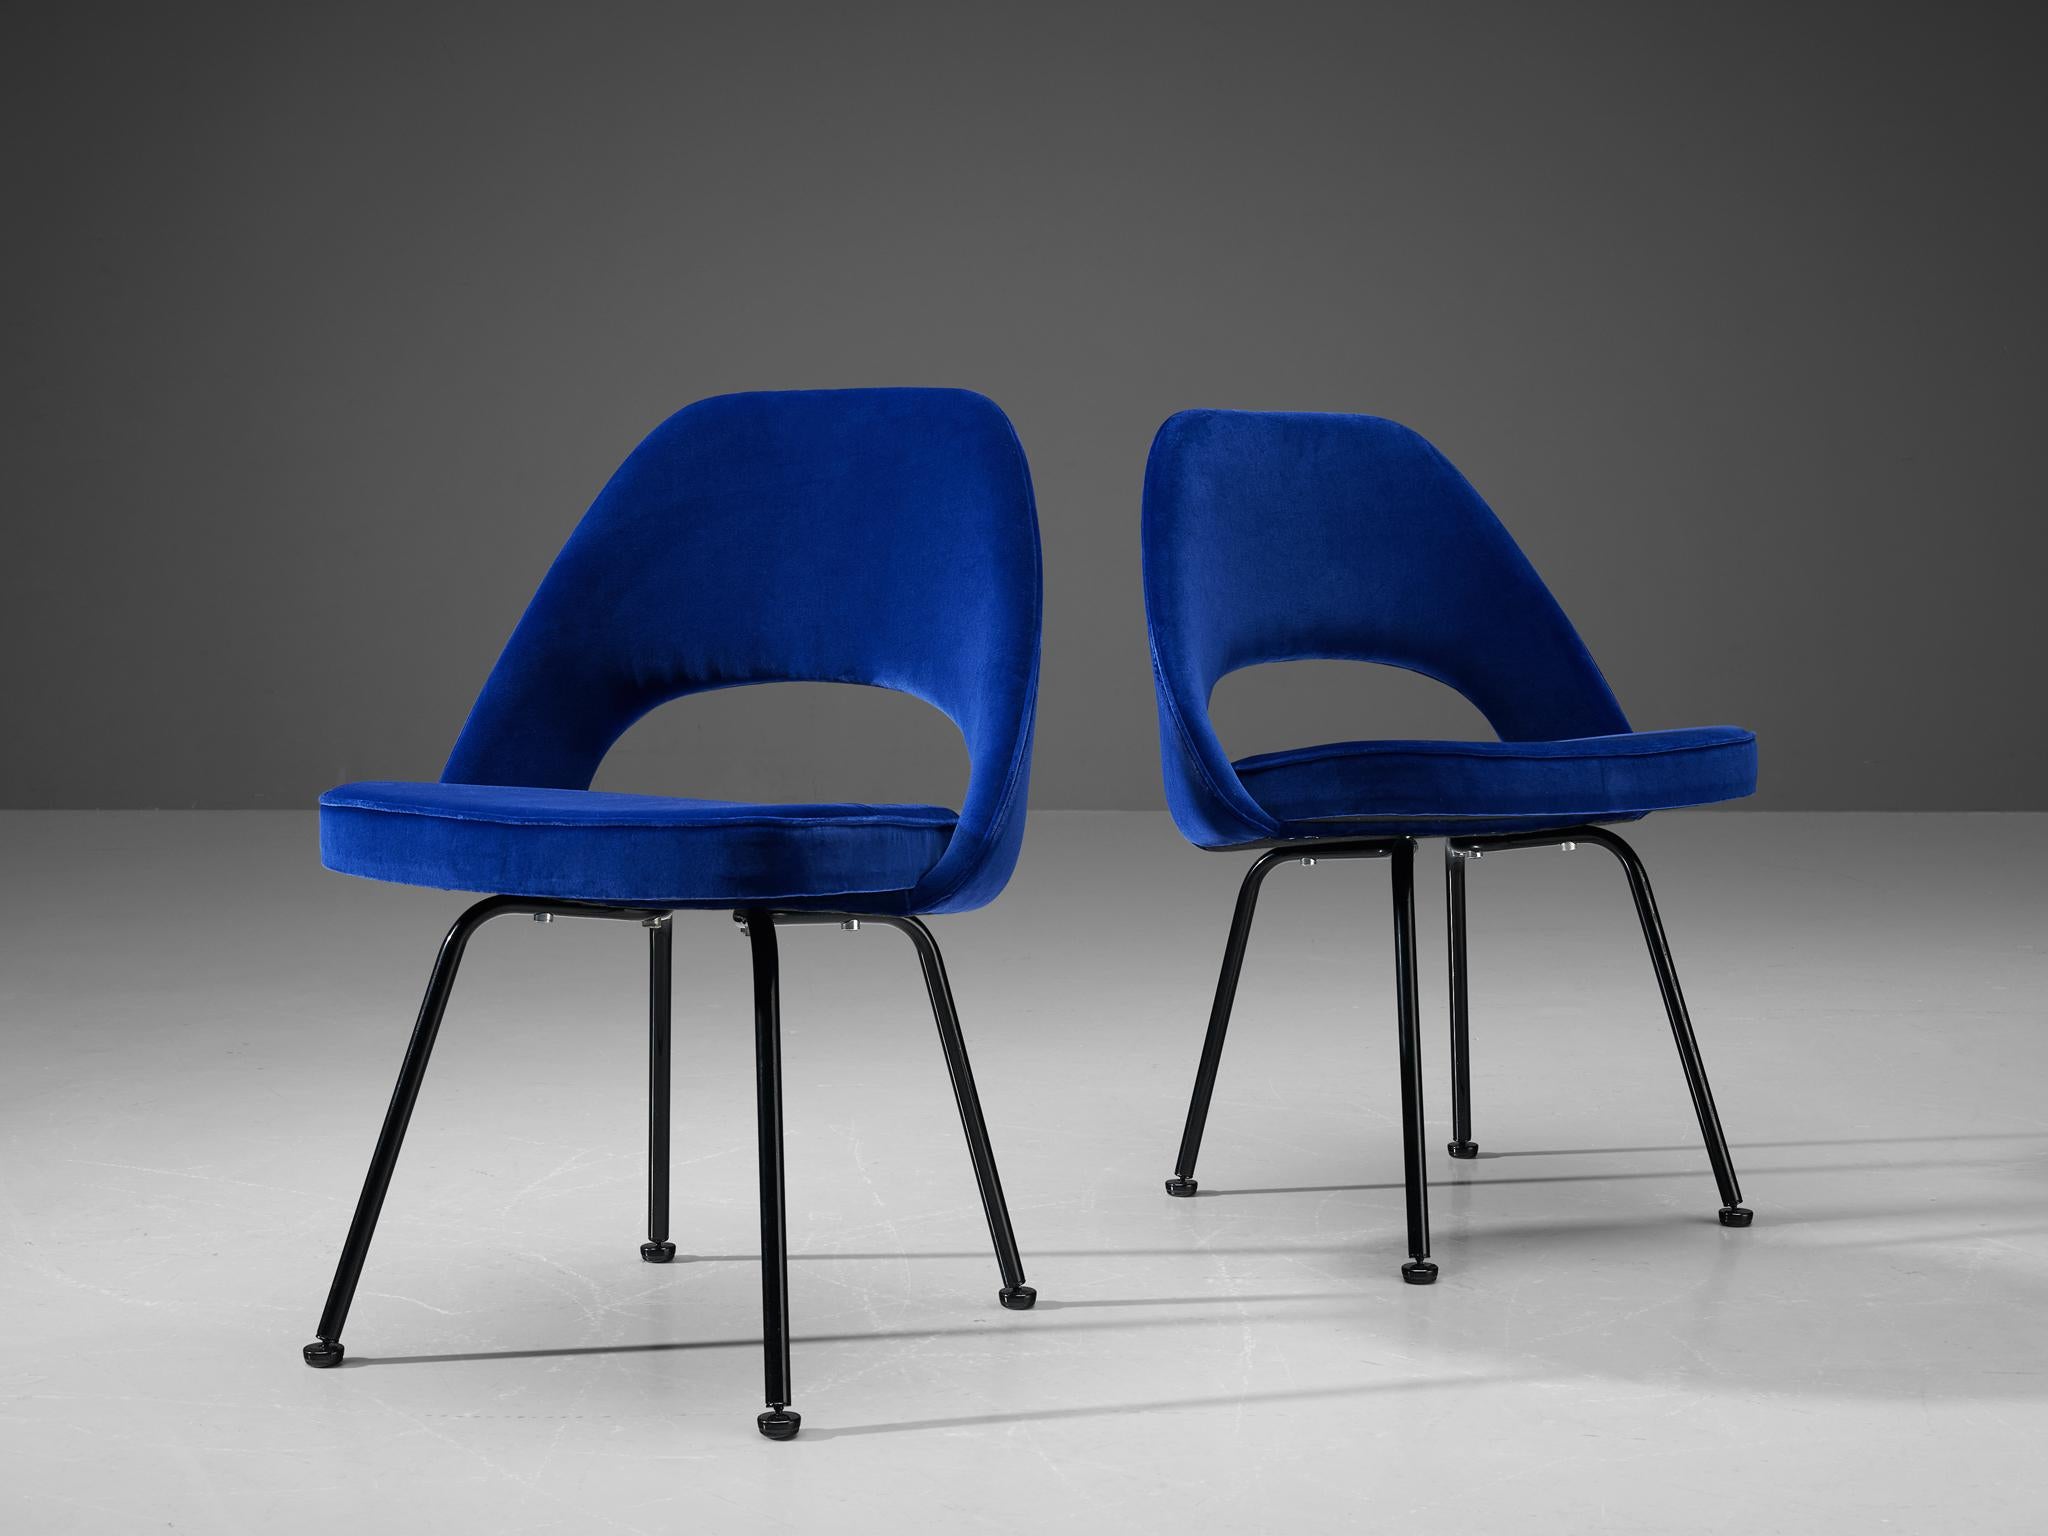 Eero Saarinen for Knoll, dining chairs in metal and velvet fabric by Pierre Frey, United States, 1970s. 

Pair of iconic dining chairs designed by Eero Saarinen for Knoll International. A fluid, sculptural form. This organic shaped chair has a